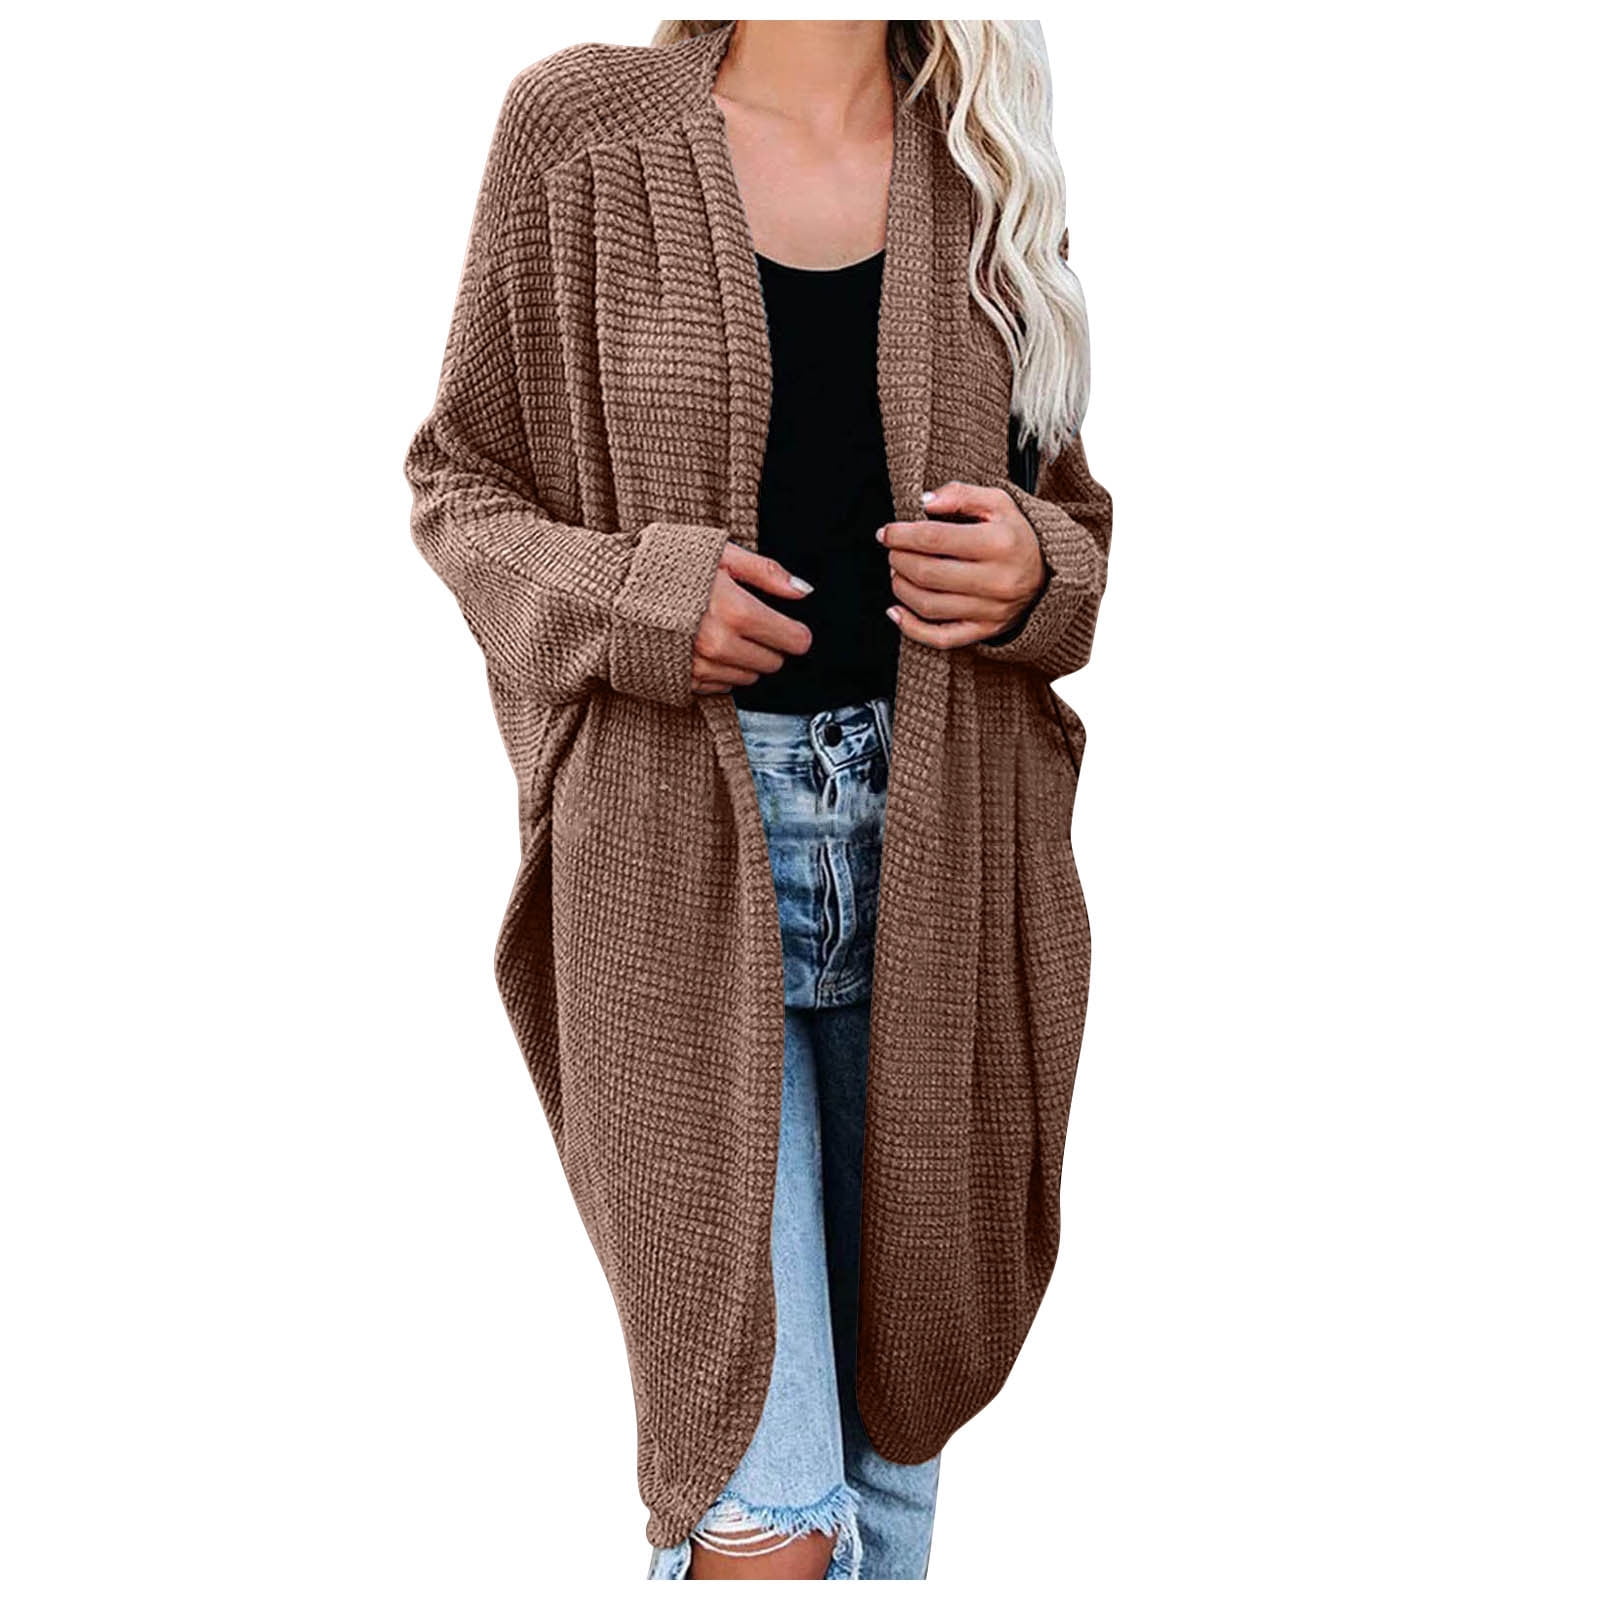 JSGEK Long Shirt Discount Loose V-Neck Color Cardigan Blouse Sweater Knitting Autumn Fashion Women Sleeve Casual Long Tops Solid